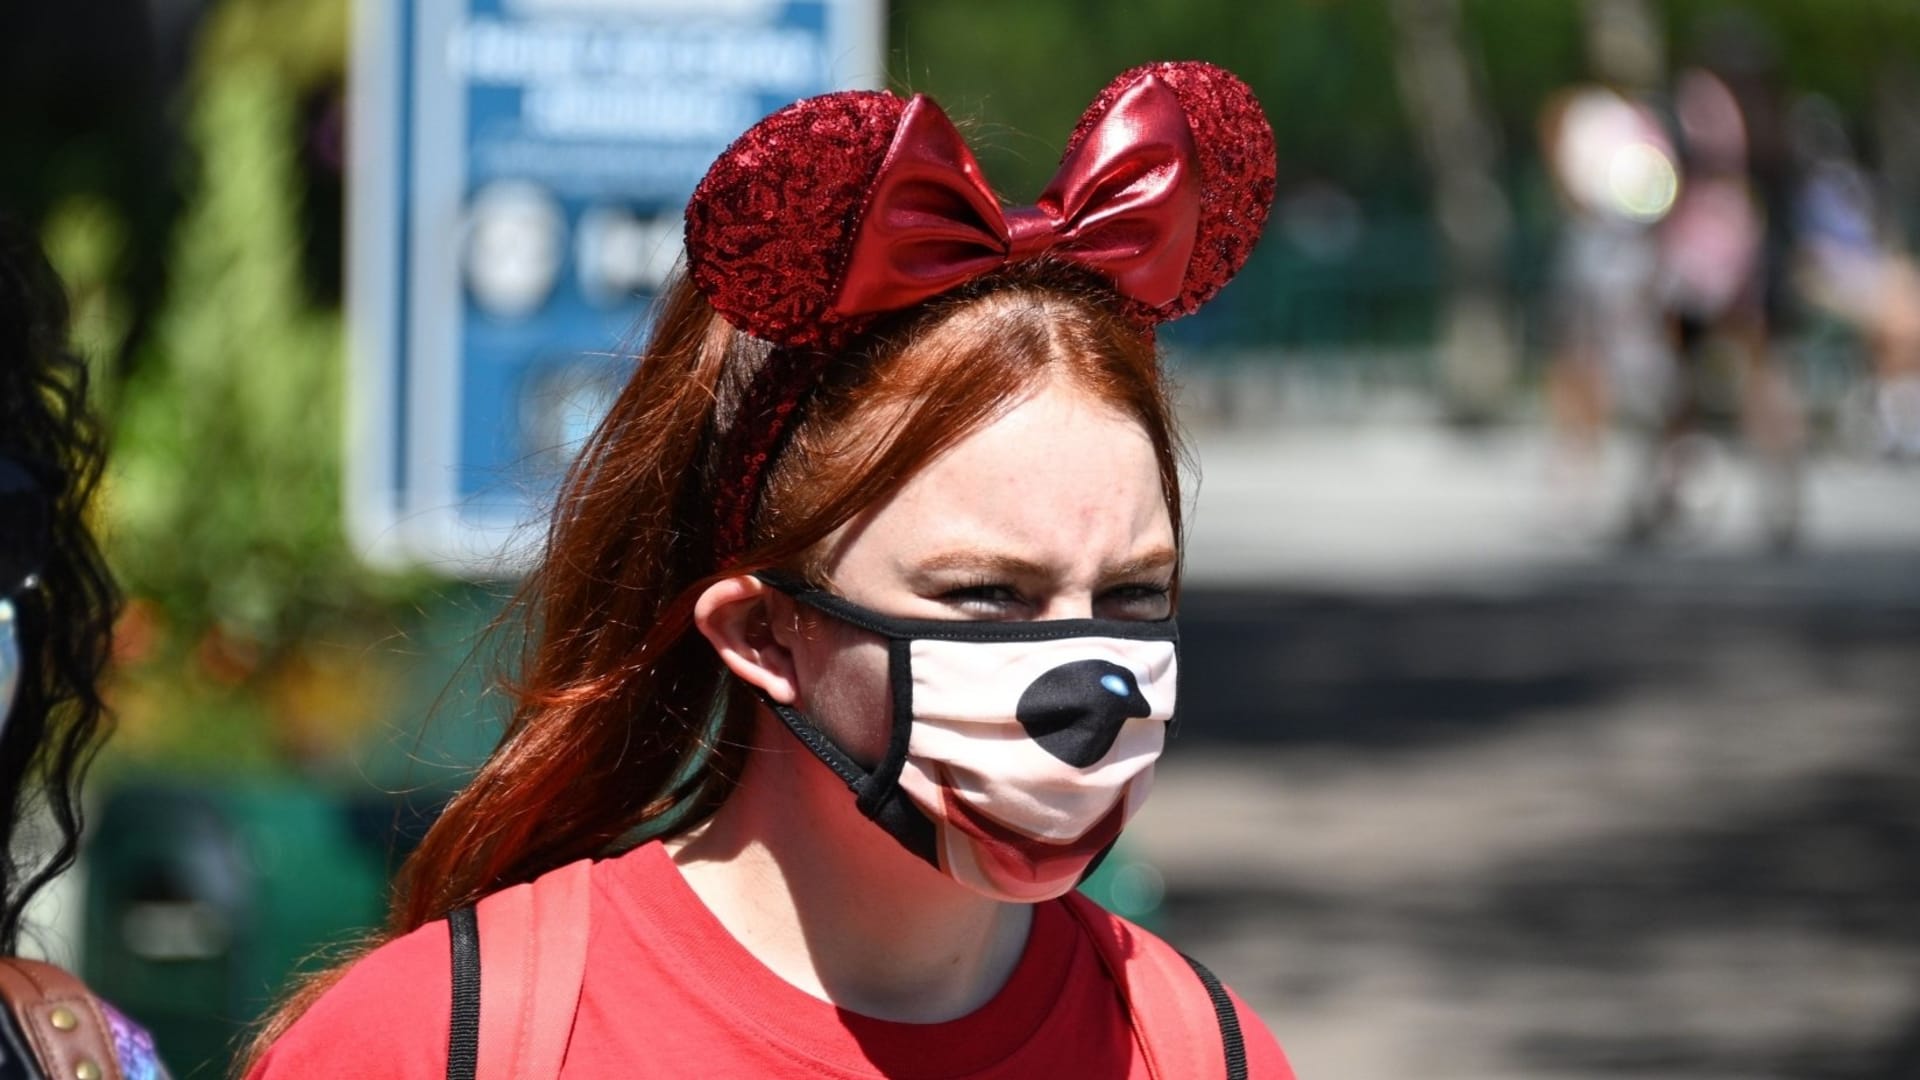 Disney World Is Reopening in Florida With Special Health Precautions